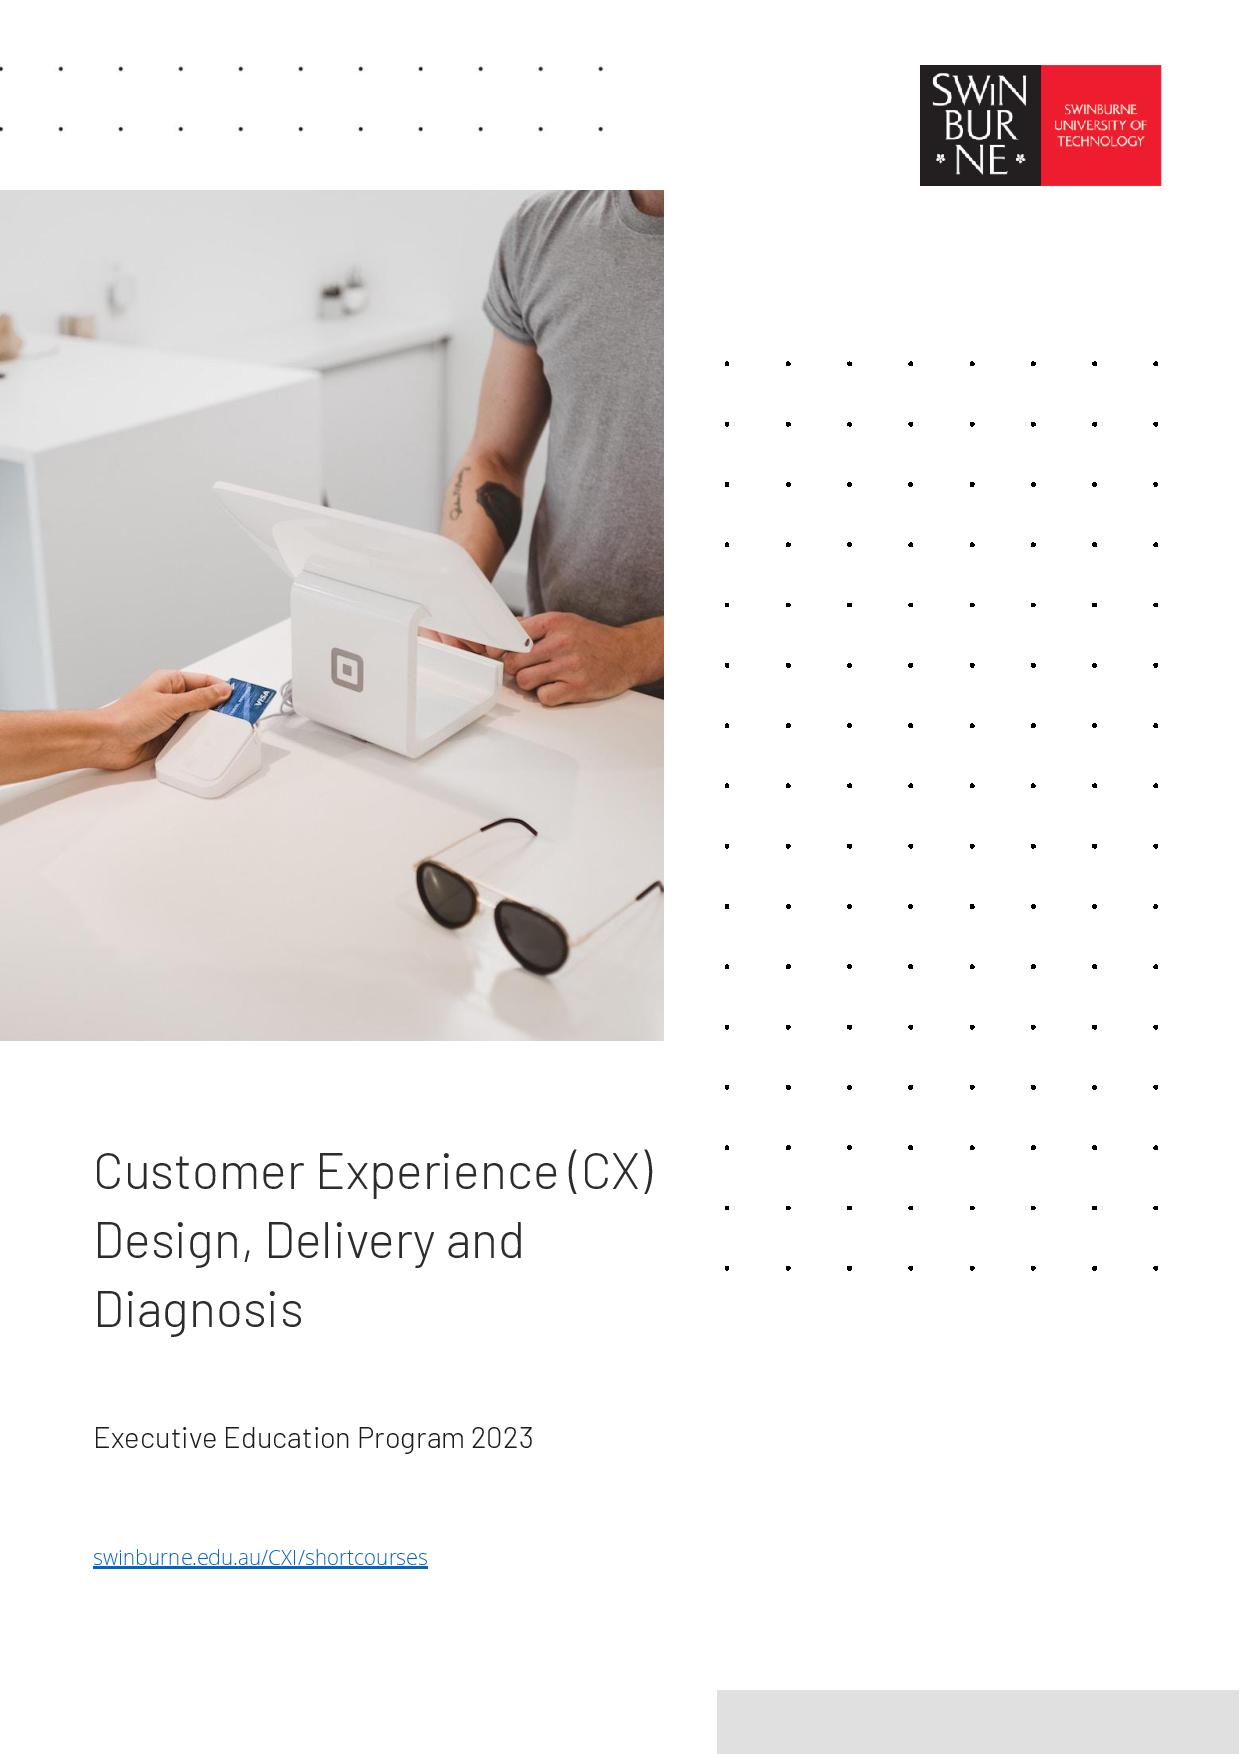 Customer Experience (CX) Design, Delivery and Diagnosis